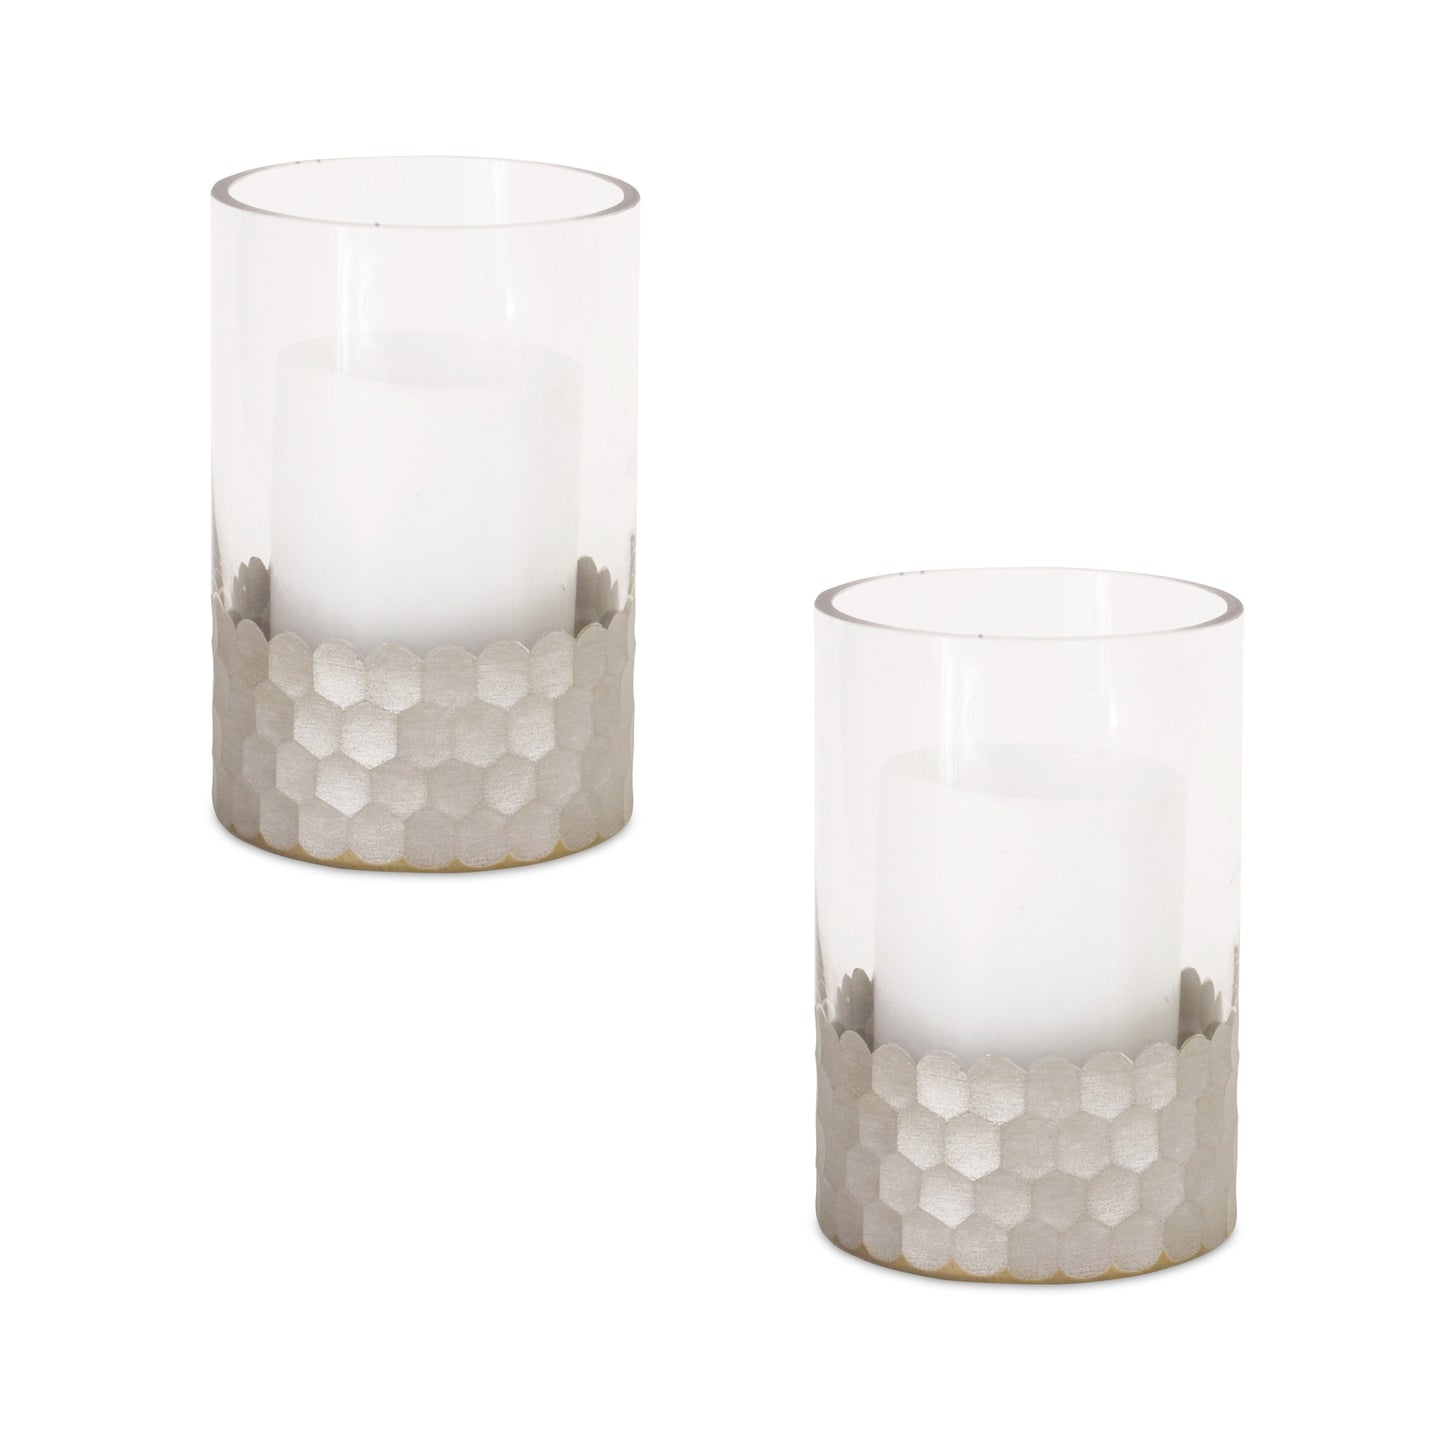 Glass Hurricane Candle Holder with Honeycomb (Set of 2)